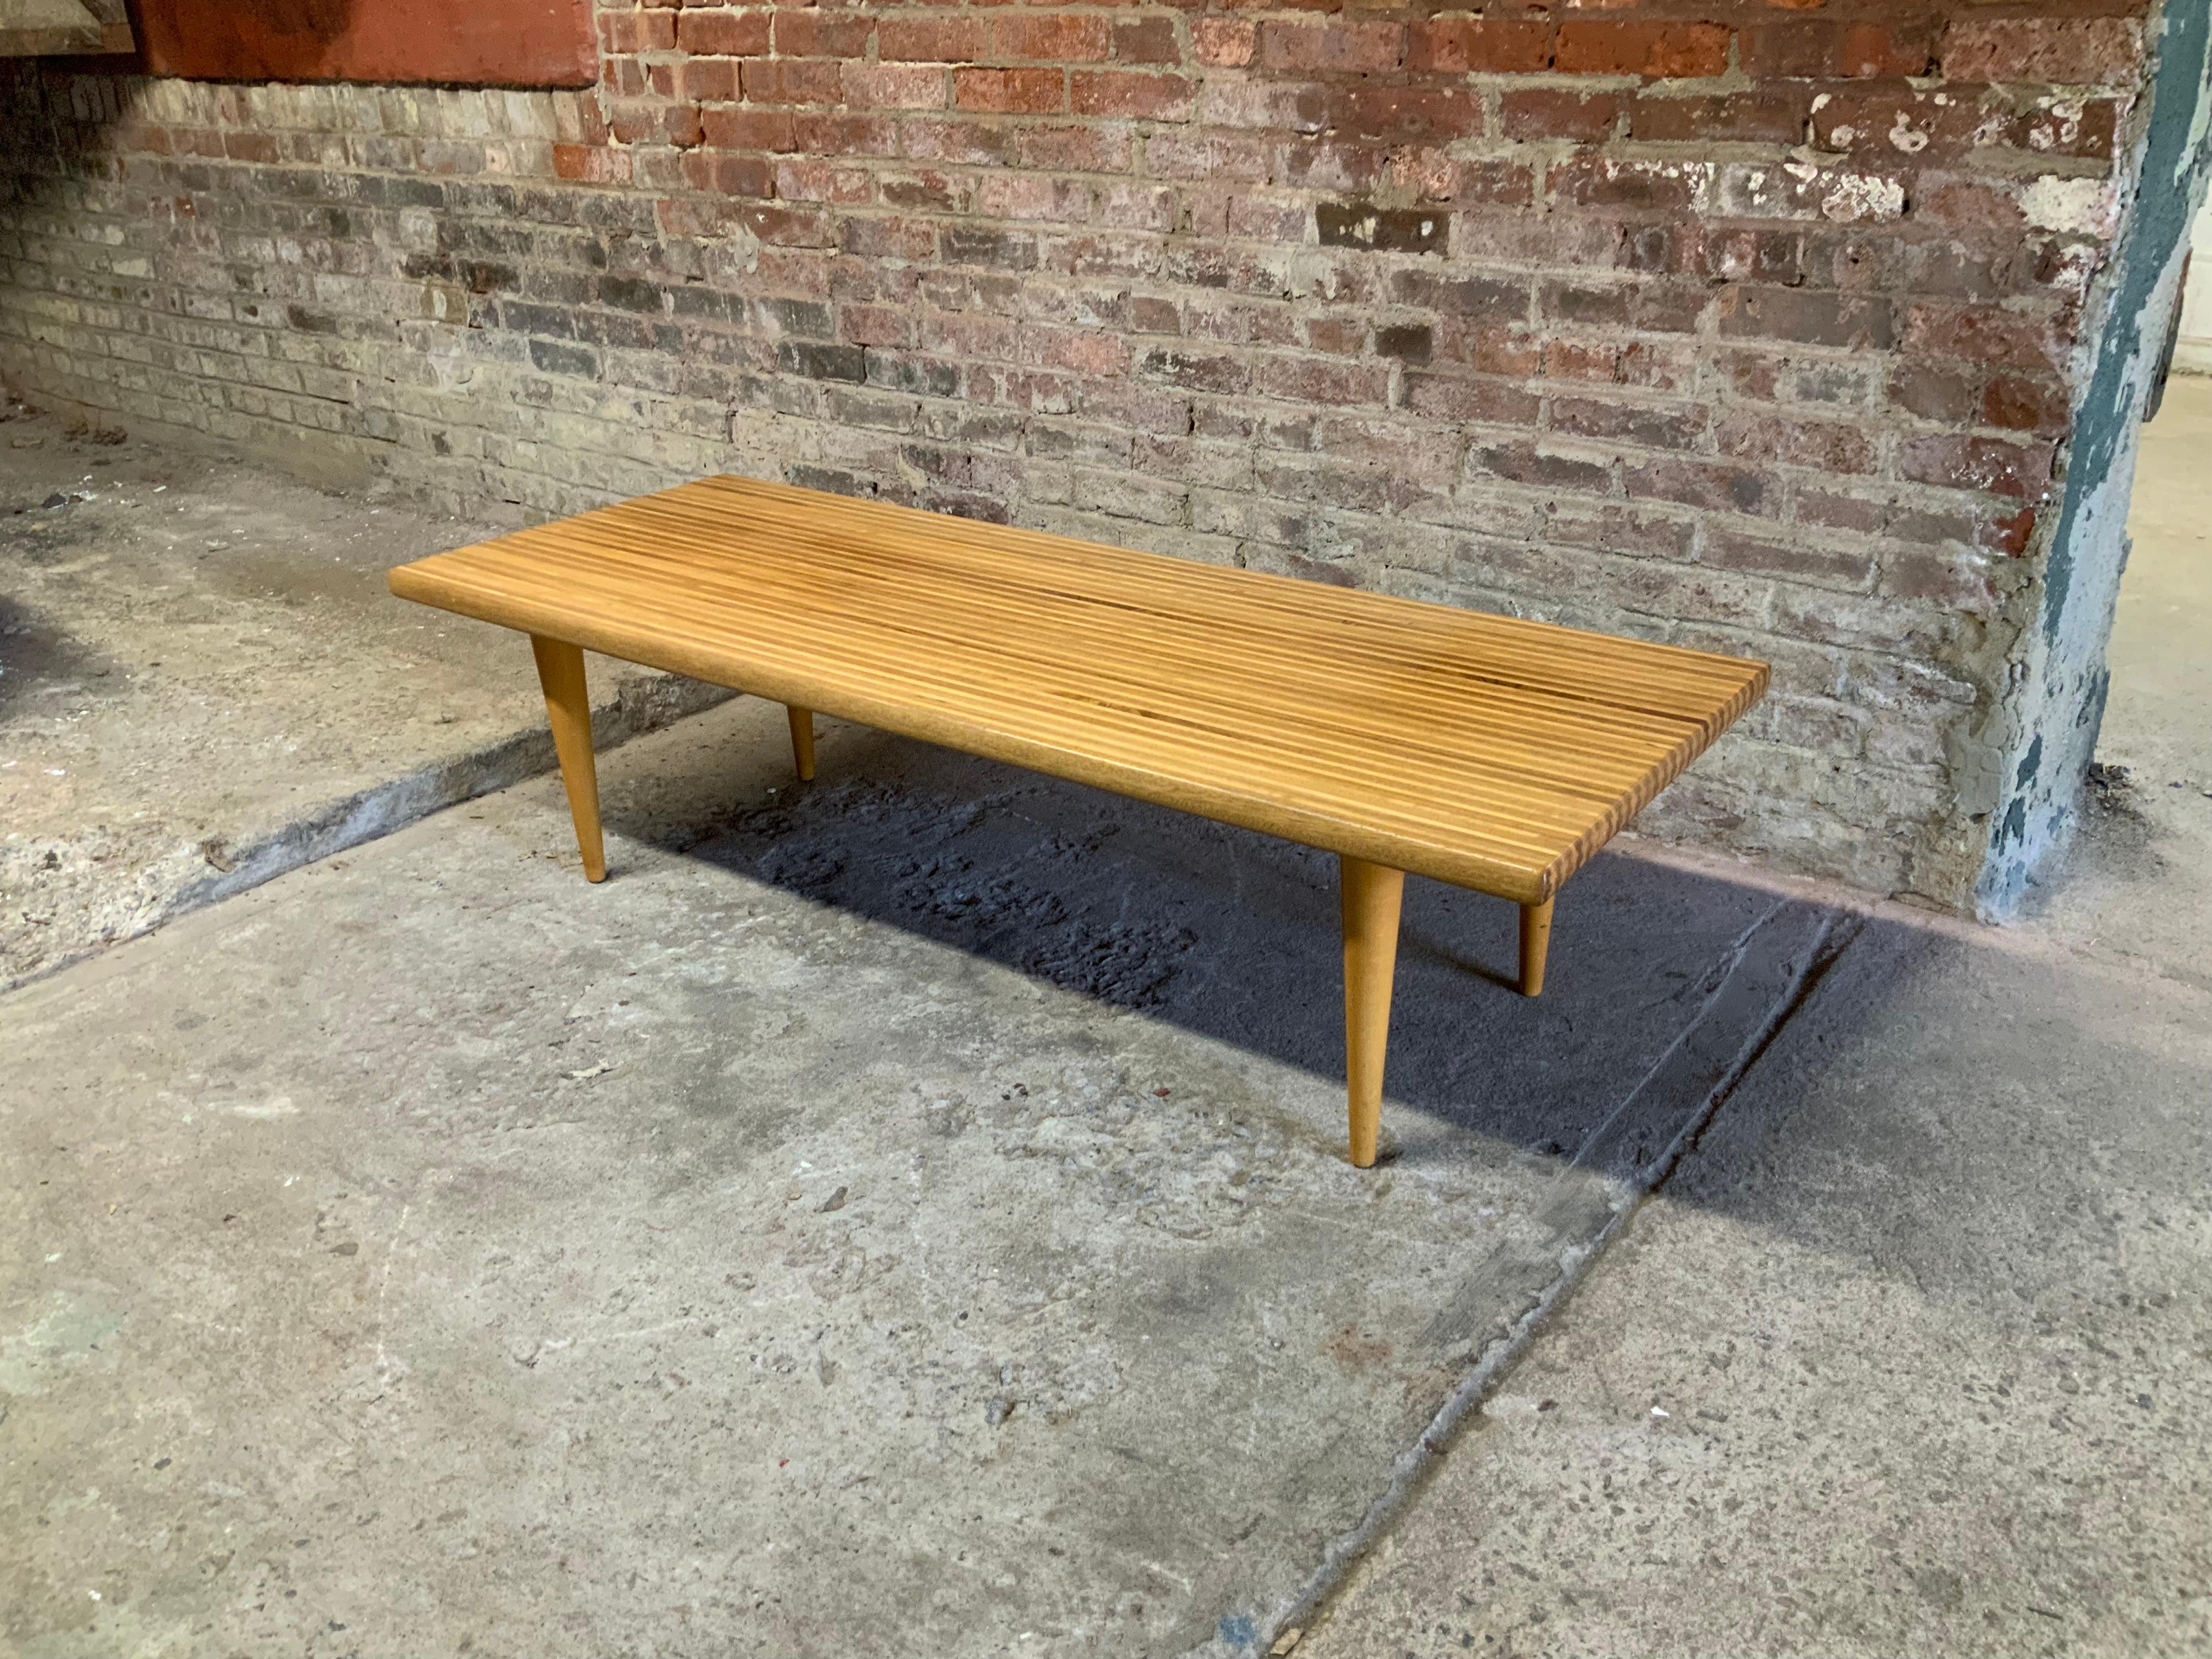 Yngvar Sandstrom for Nordiska Kompaniet butcher block coffee table stunning crafted coffee table. Made in Sweden, circa 1955. Crafted with alternating teak and beech (possibly maple) wood strips with tongue and groove joinery that adds to the simple